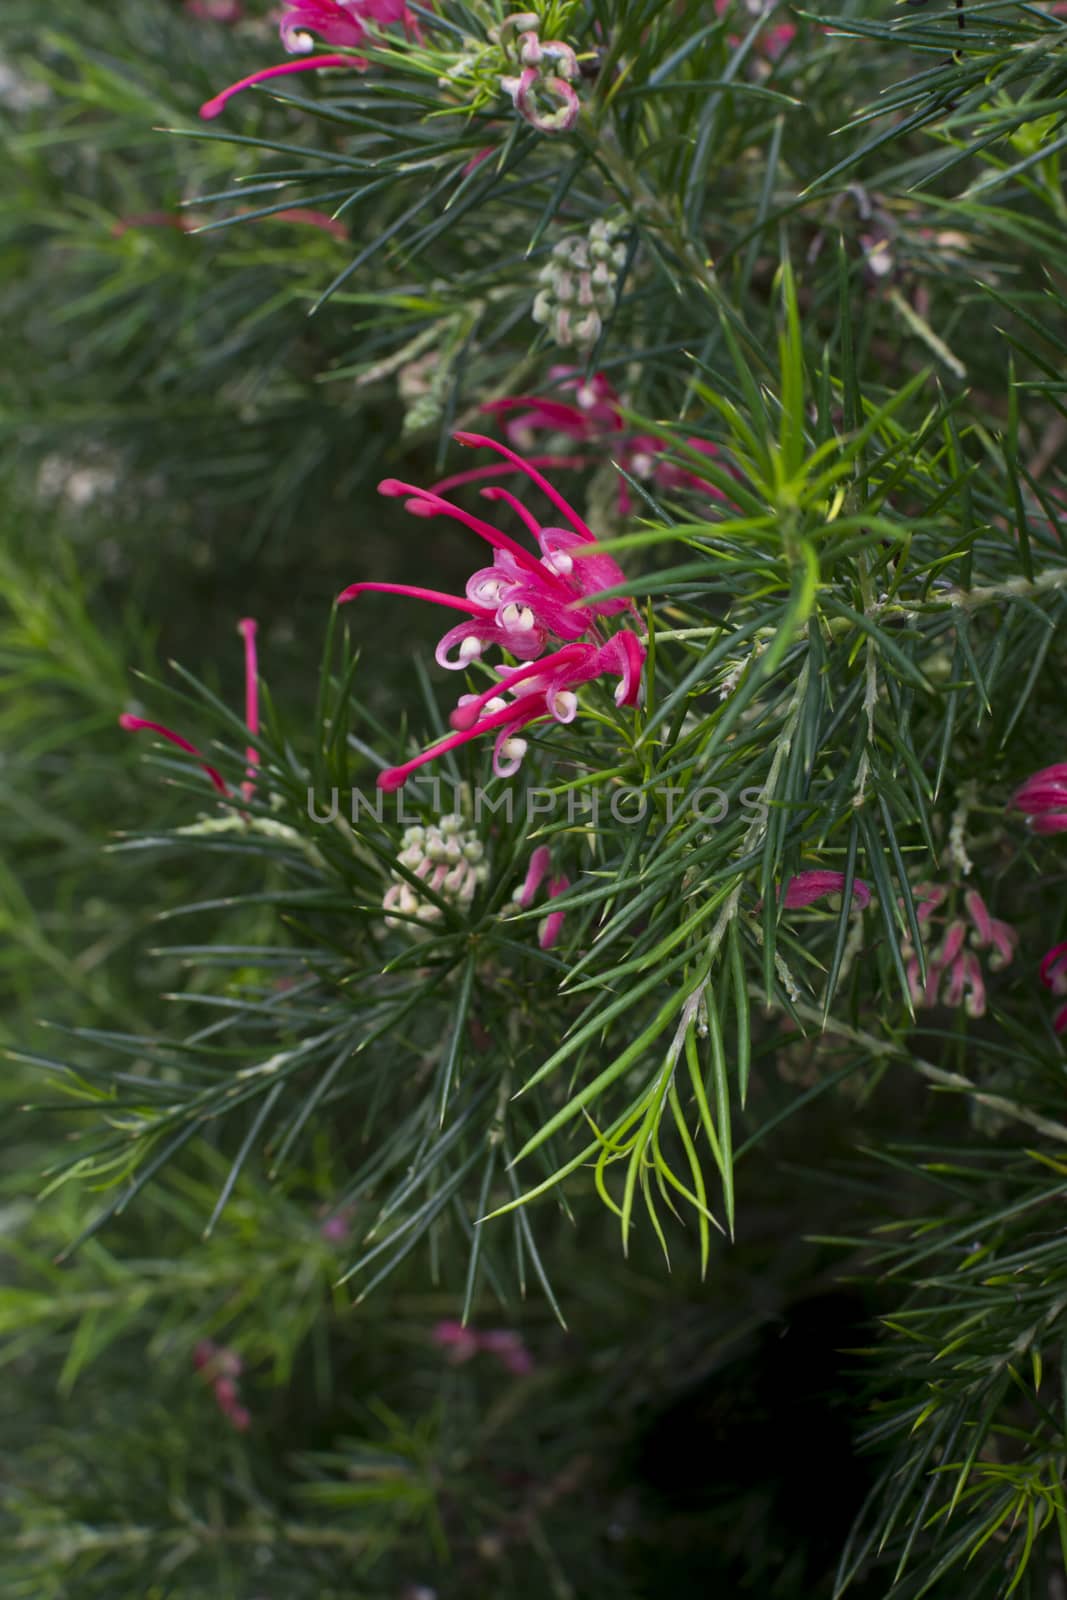 Juniper grevillea with pink flowers. Grevillea juniperina, commonly known as Juniper Grevillea, is a shrub which is endemic to eastern New South Wales and south-eastern Queensland in Australia.